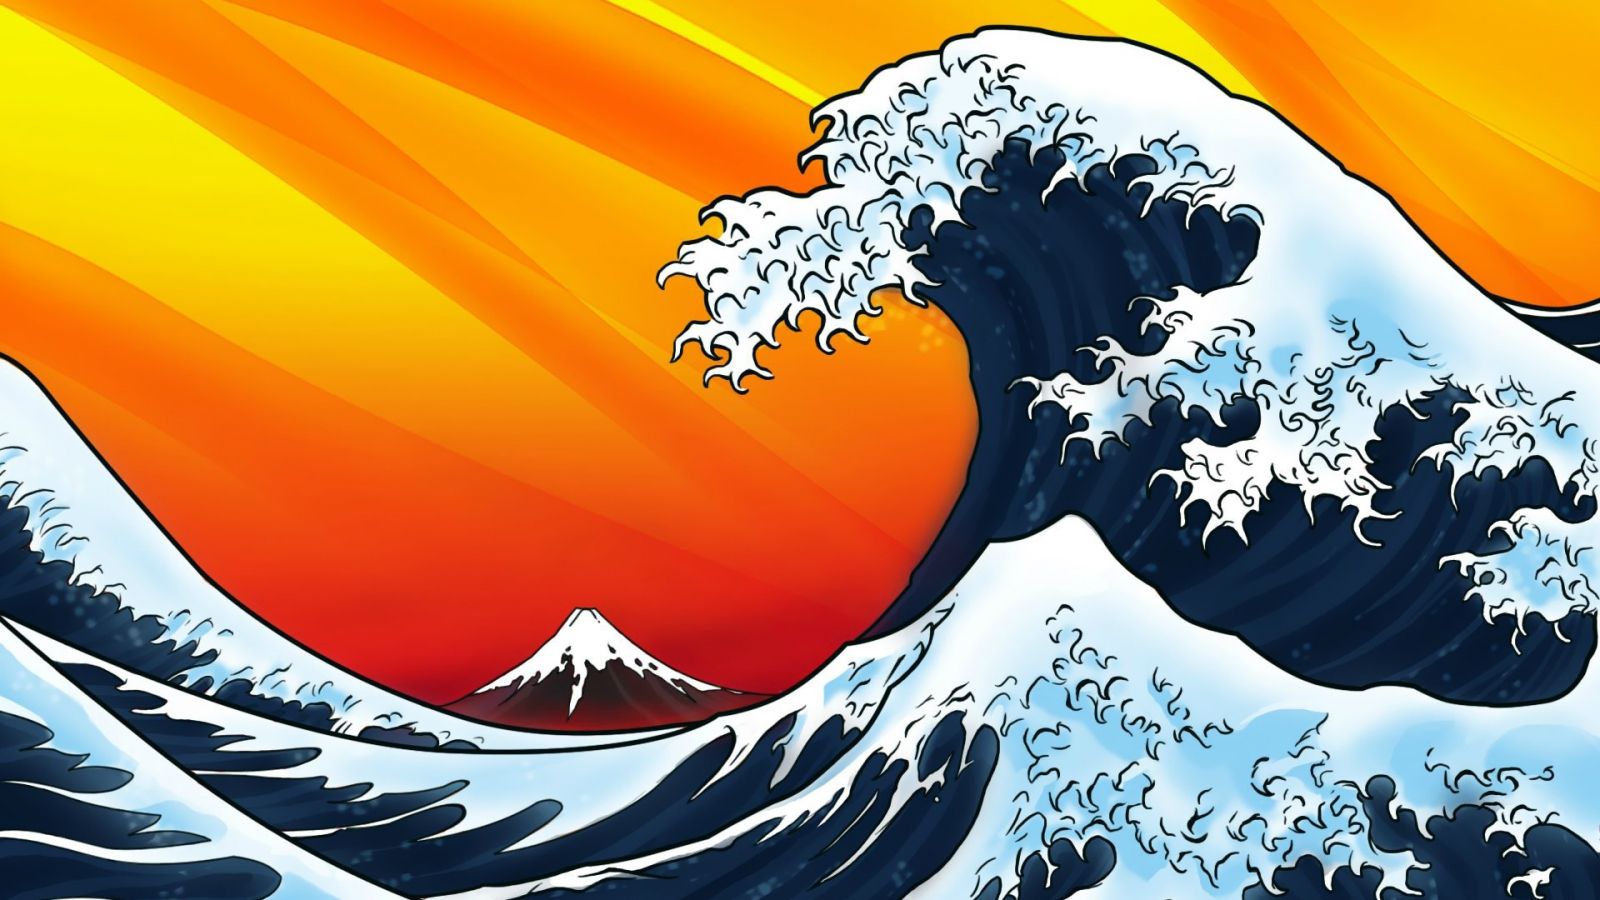 Free download Japanese style waves wallpaper Vector wallpaper 14950 [1680x1050] for your Desktop, Mobile & Tablet. Explore Japanese Wave Wallpaper. Japanese Desktop Wallpaper, Japanese Wallpaper, The Great Wave Wallpaper